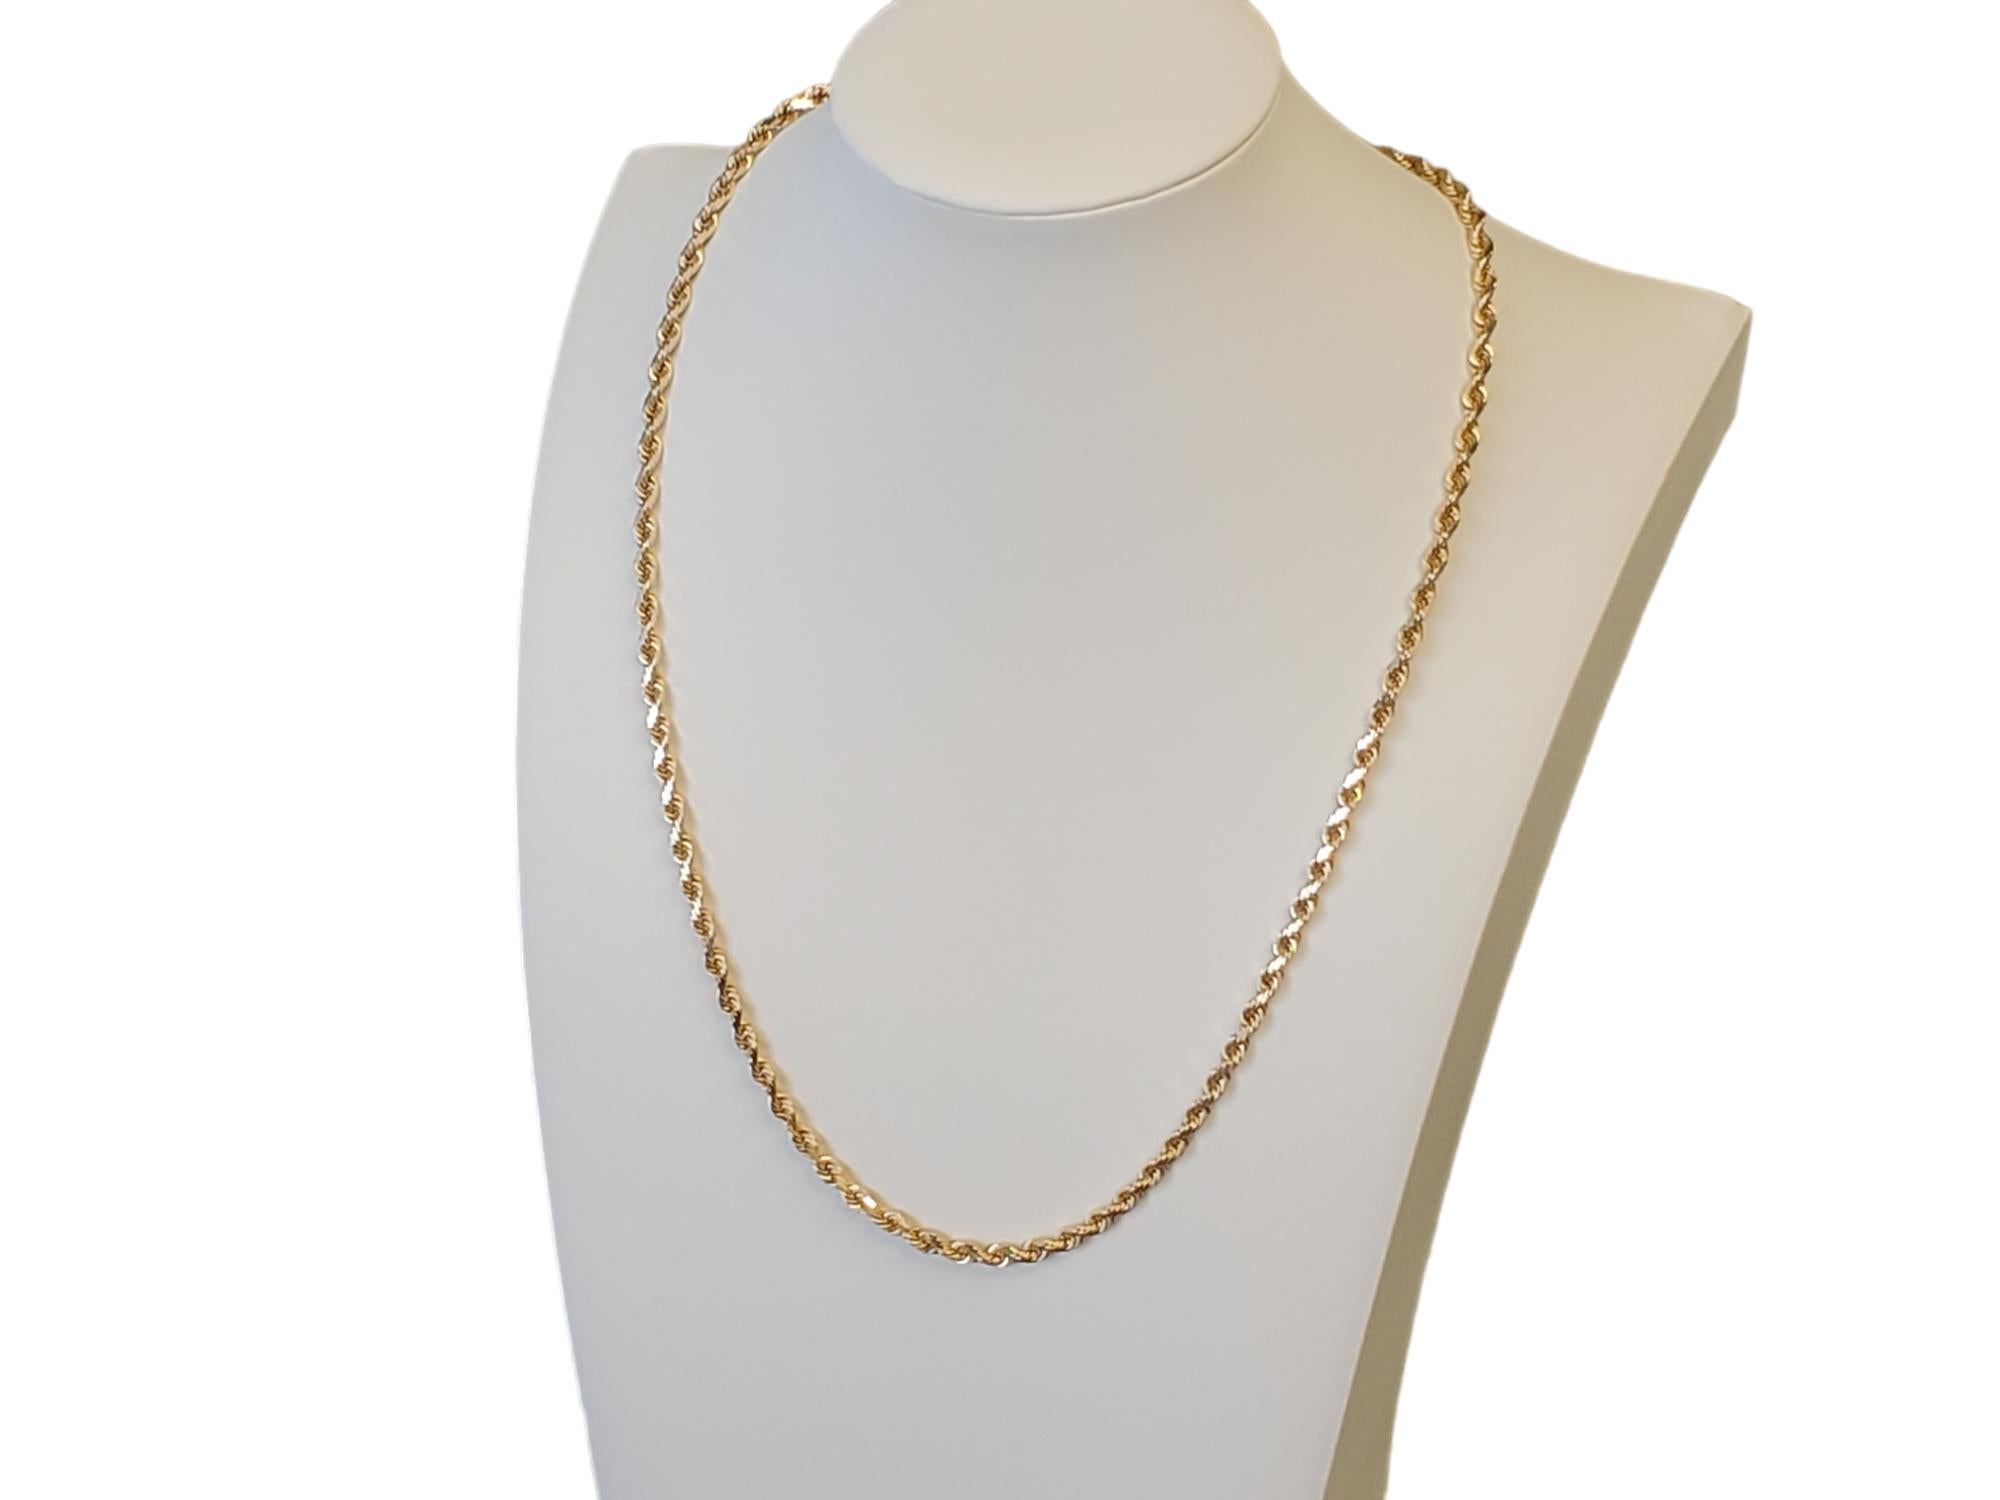 10k Solid Gold Diamond Cut Rope Chain Necklace 22